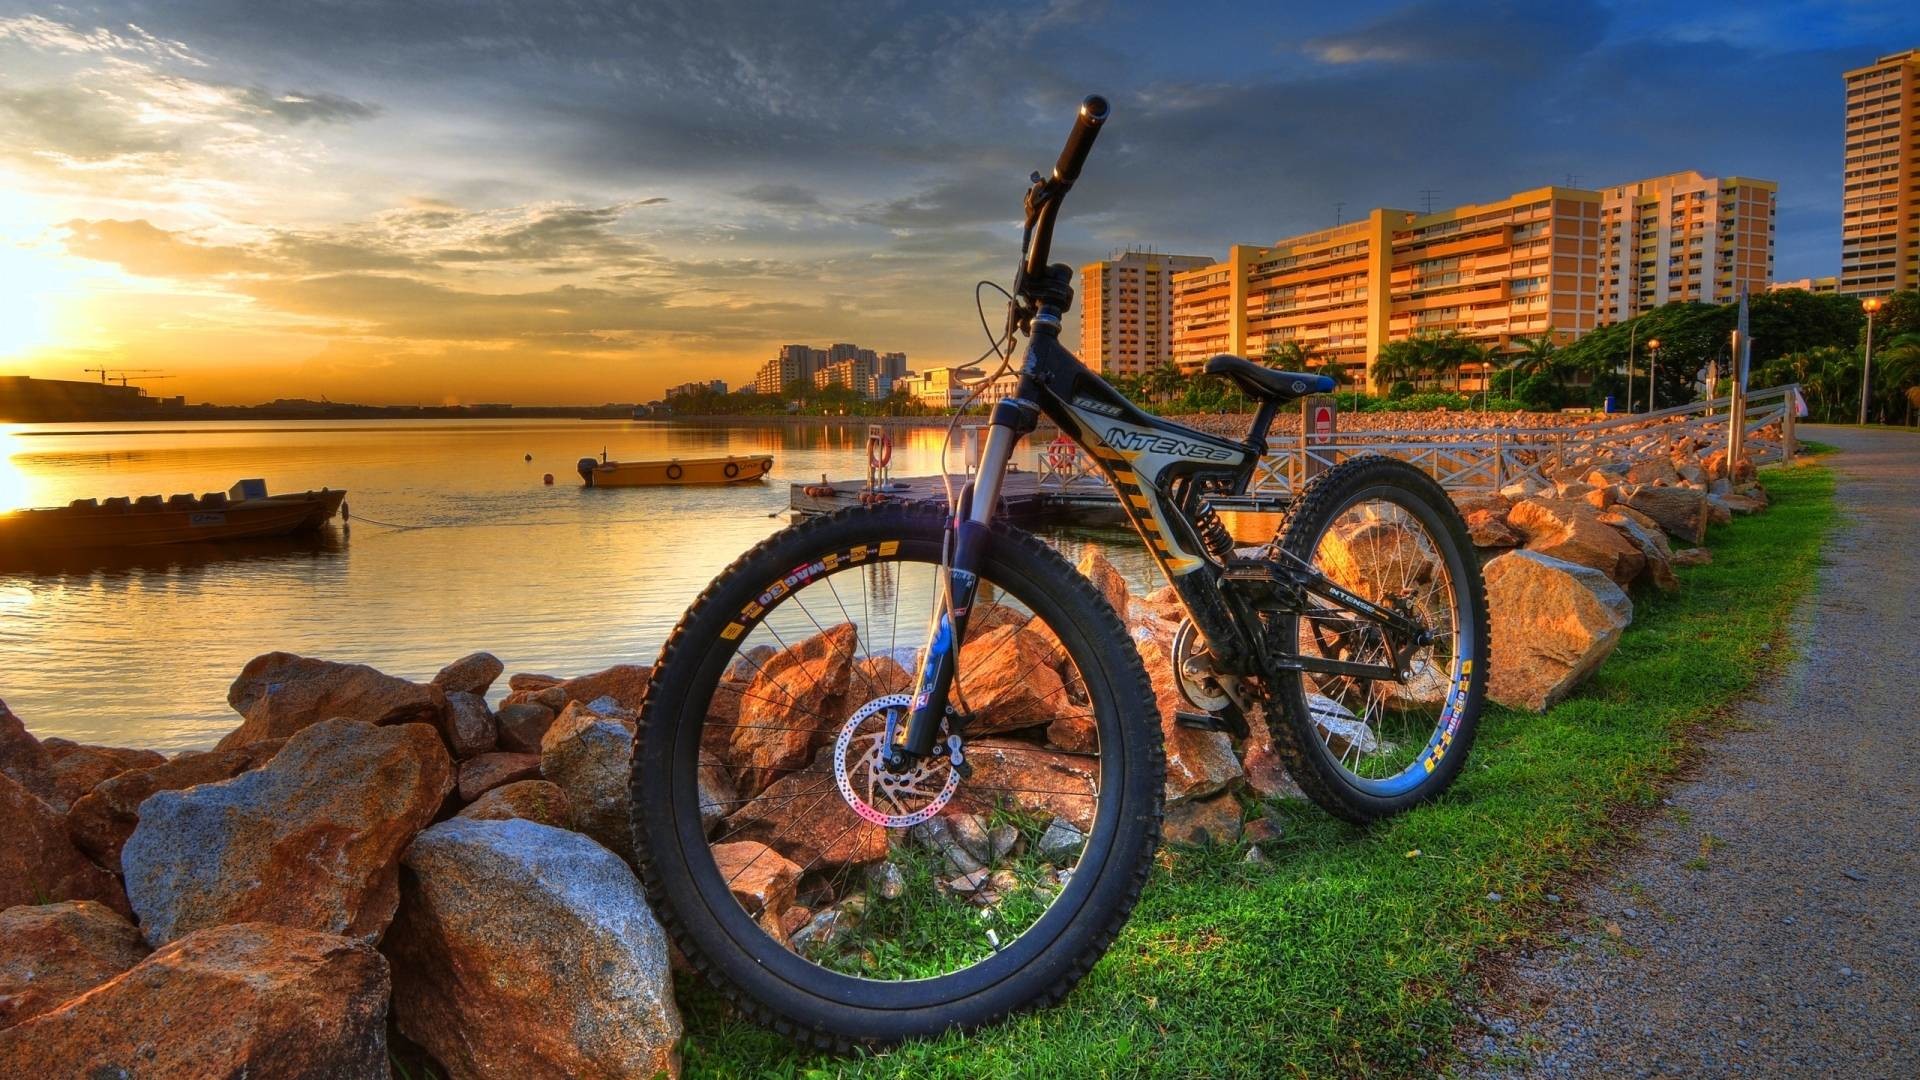 full hd 3d wallpapers 1920x1080,bicycle wheel,bicycle,vehicle,tire,bicycle tire